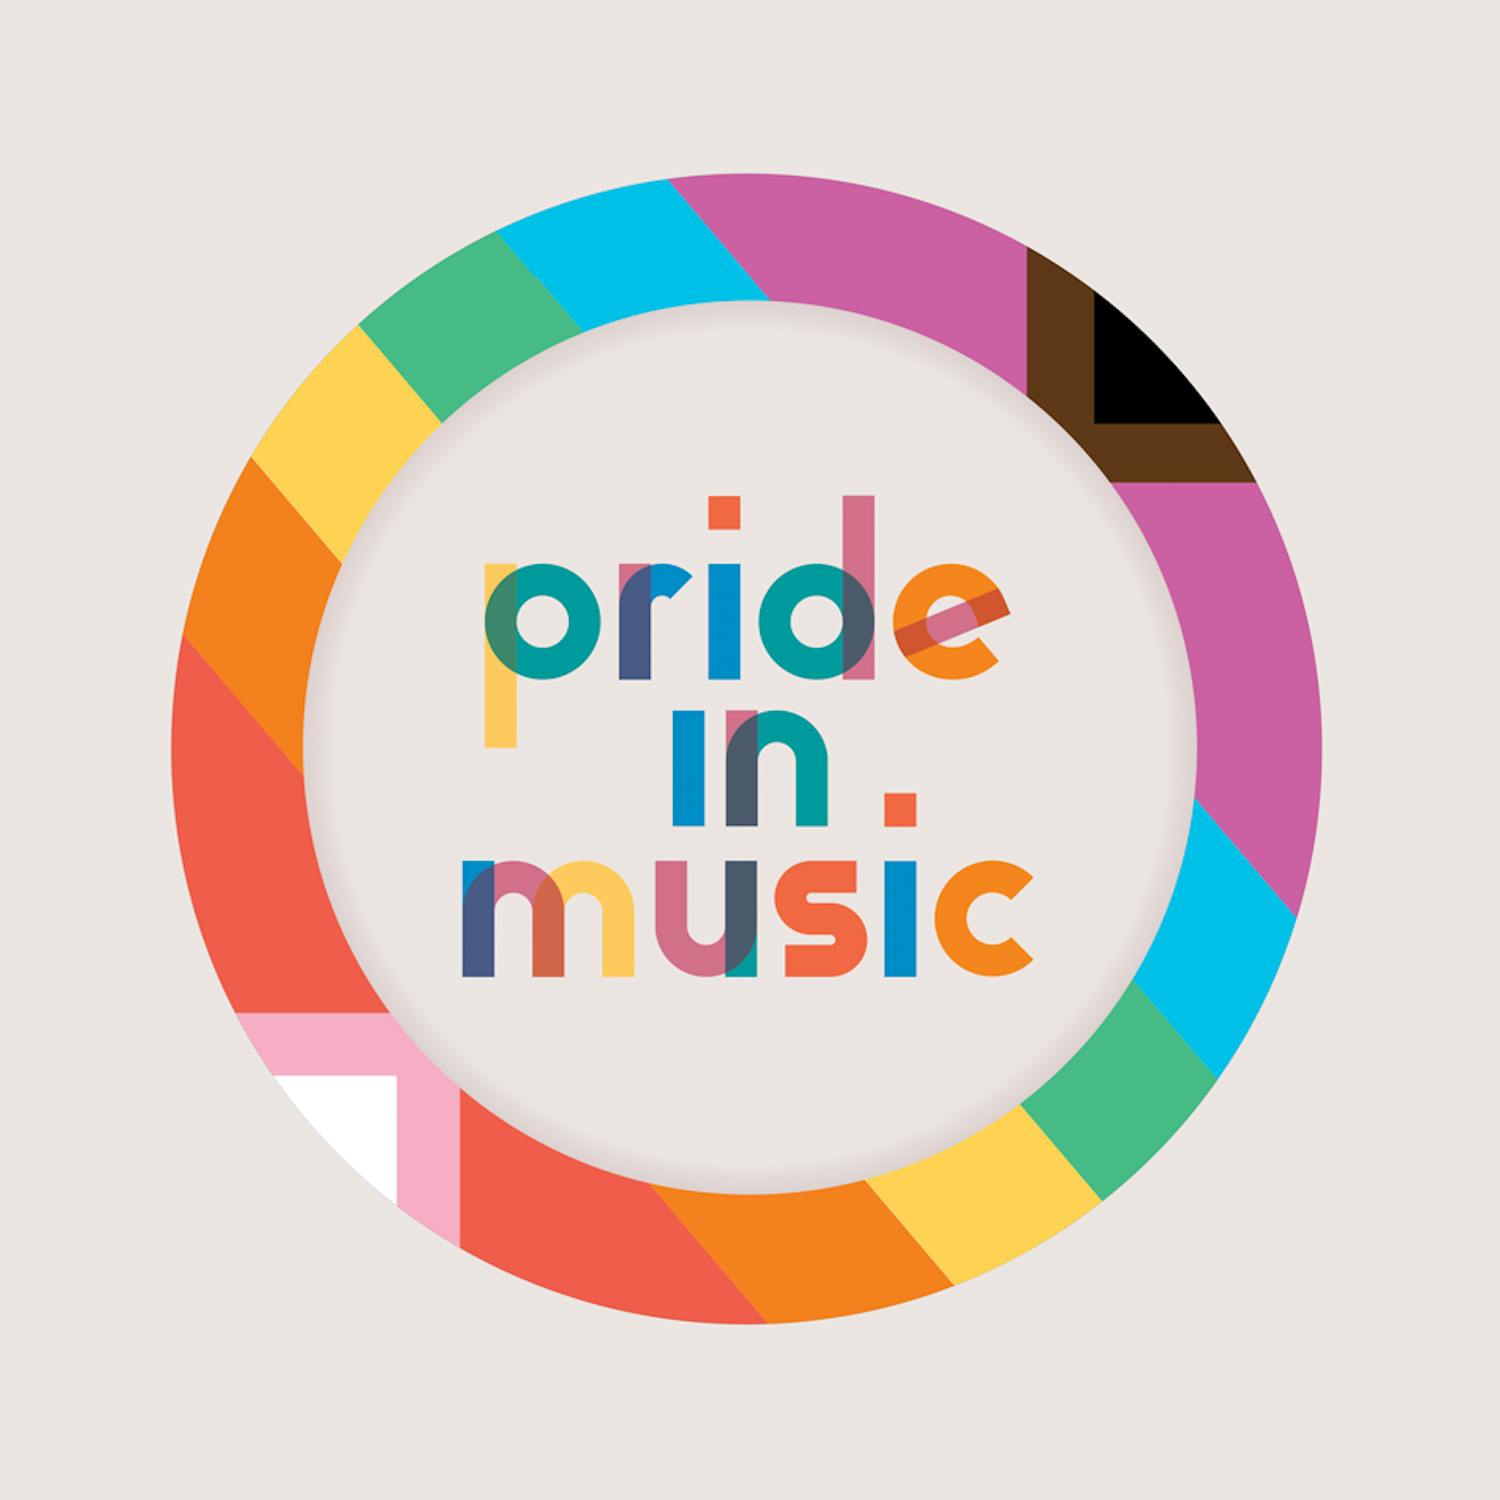 Pride-In-Music-Shows-Support-To-BlackLivesMatter-Movement-02